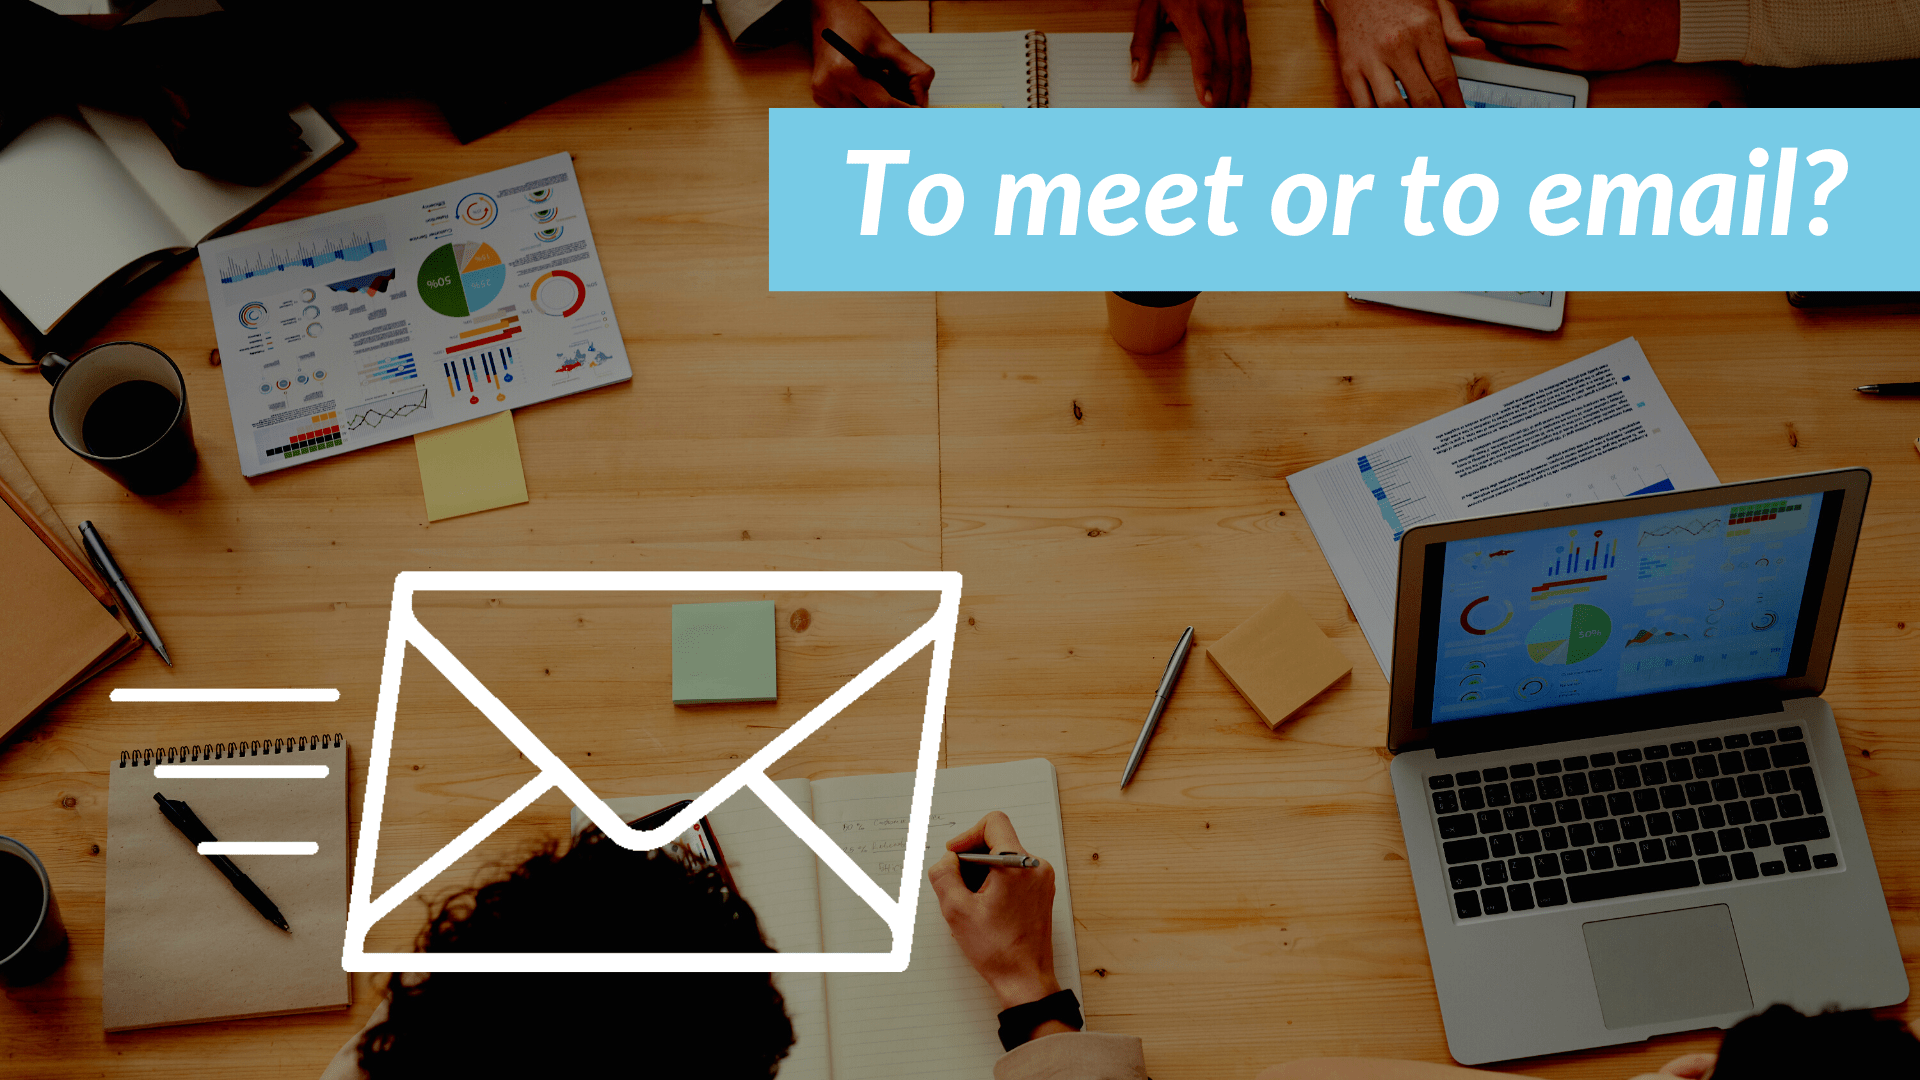 To meet or to email? A question you should be asking